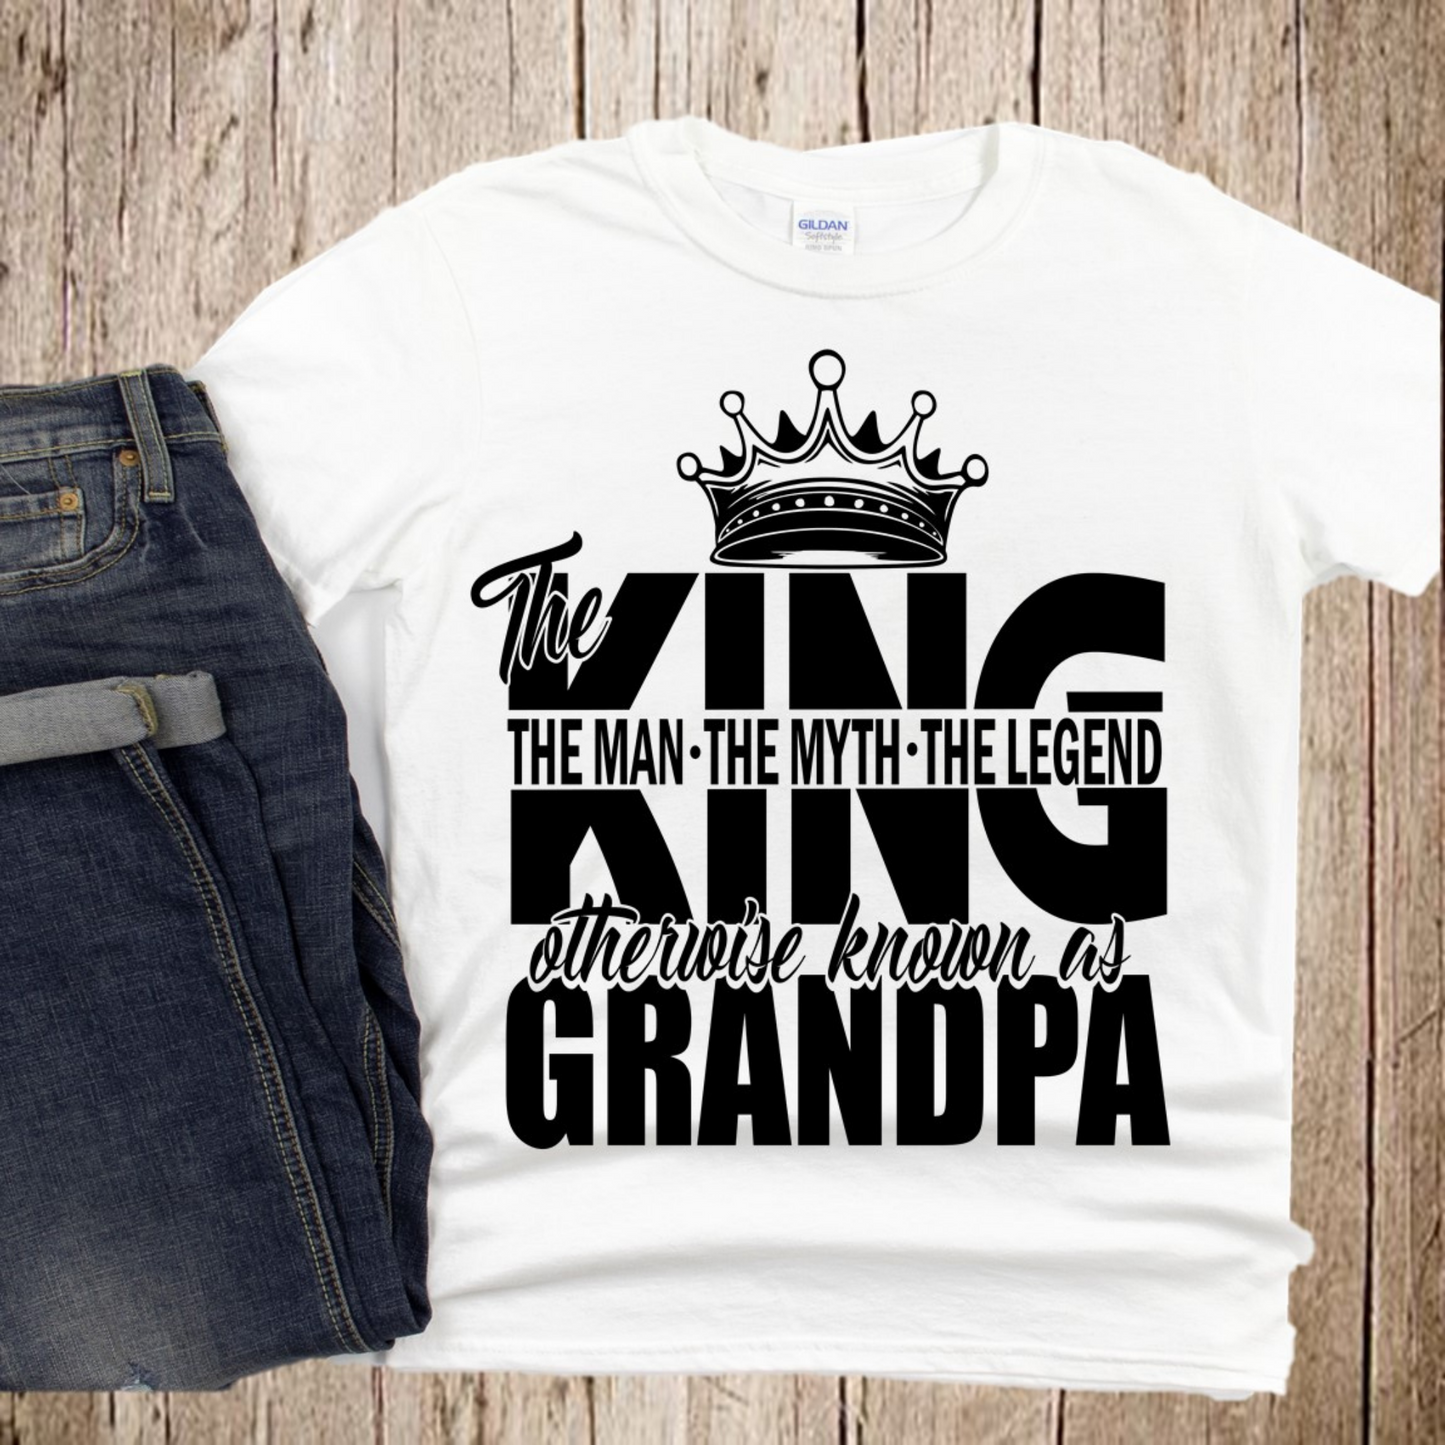 King otherwise known as Grandpa